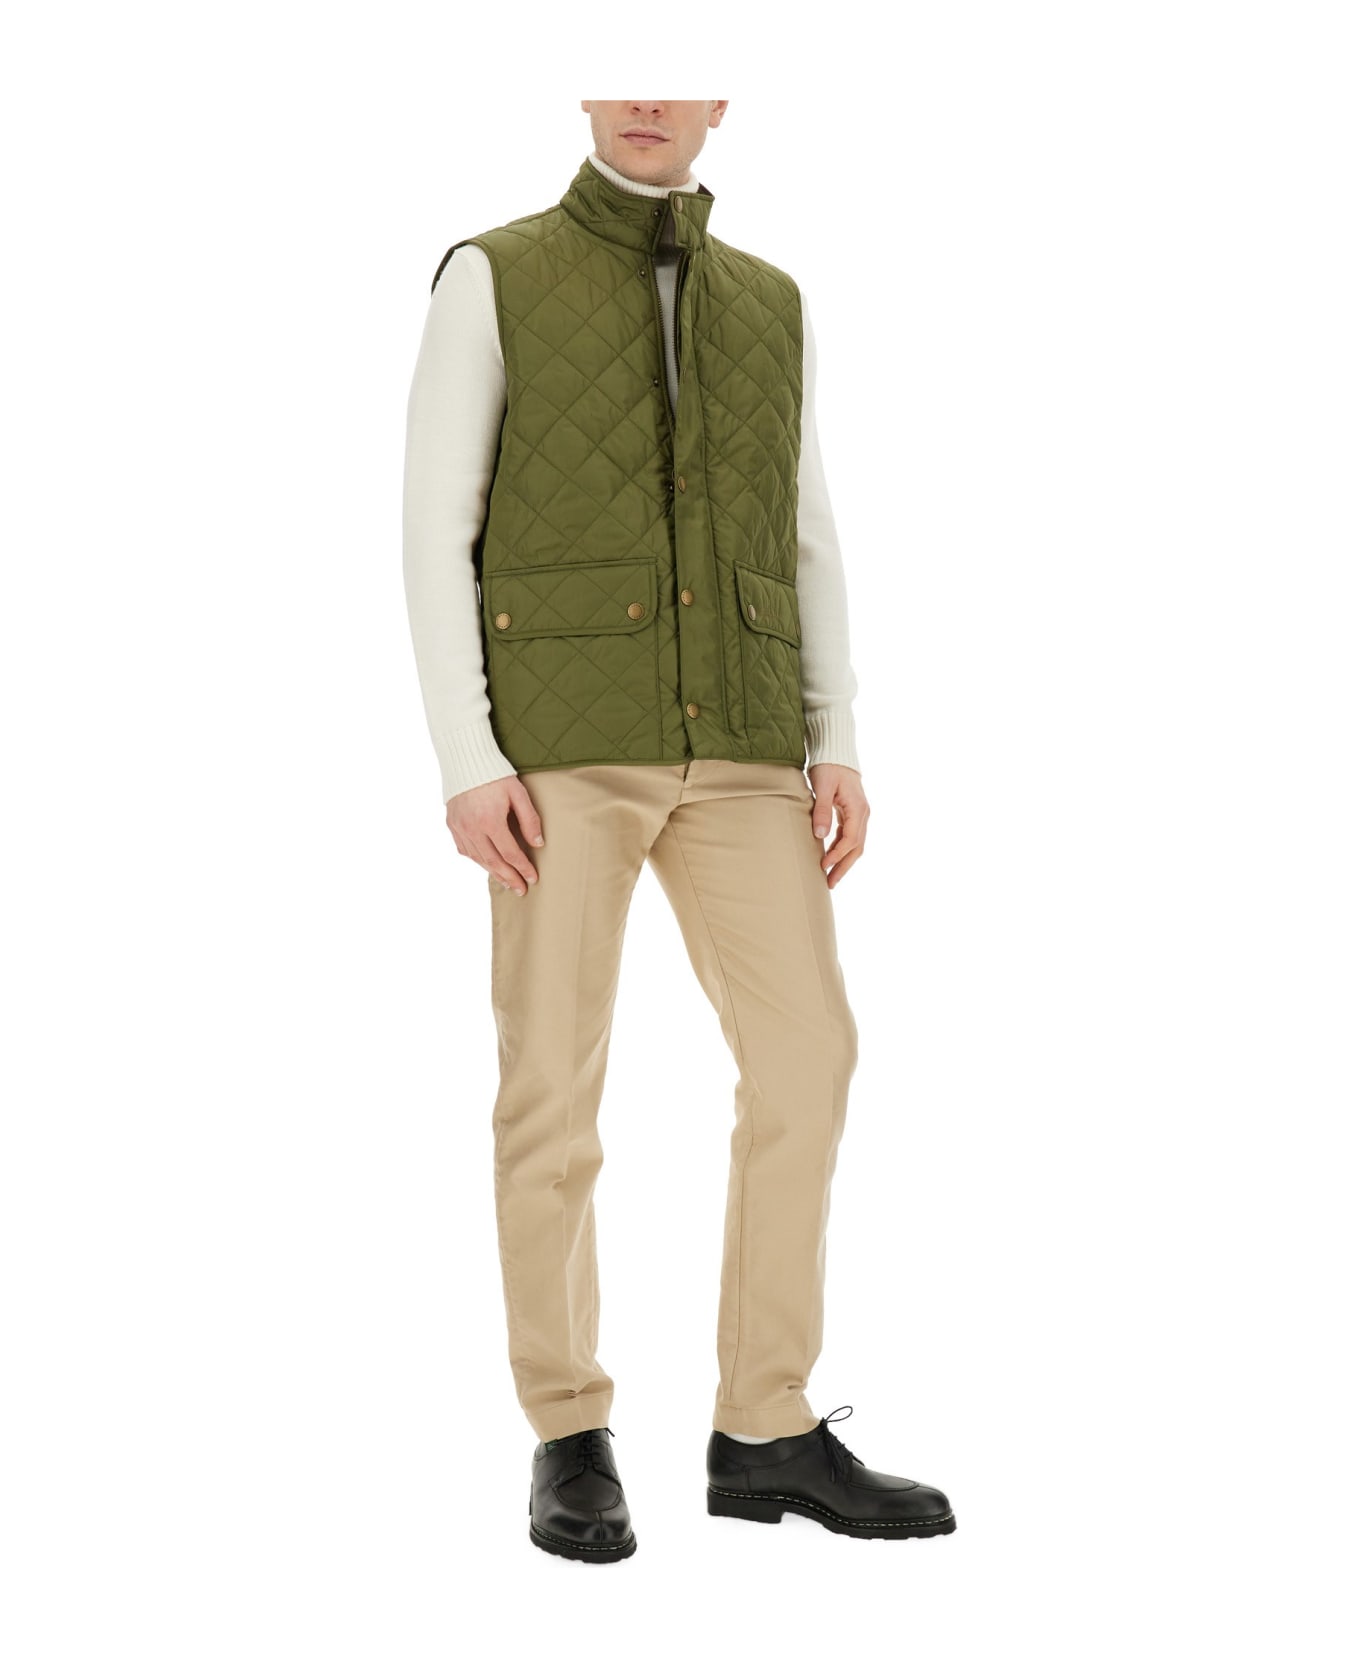 Barbour Quilted Vest - Dk Moss